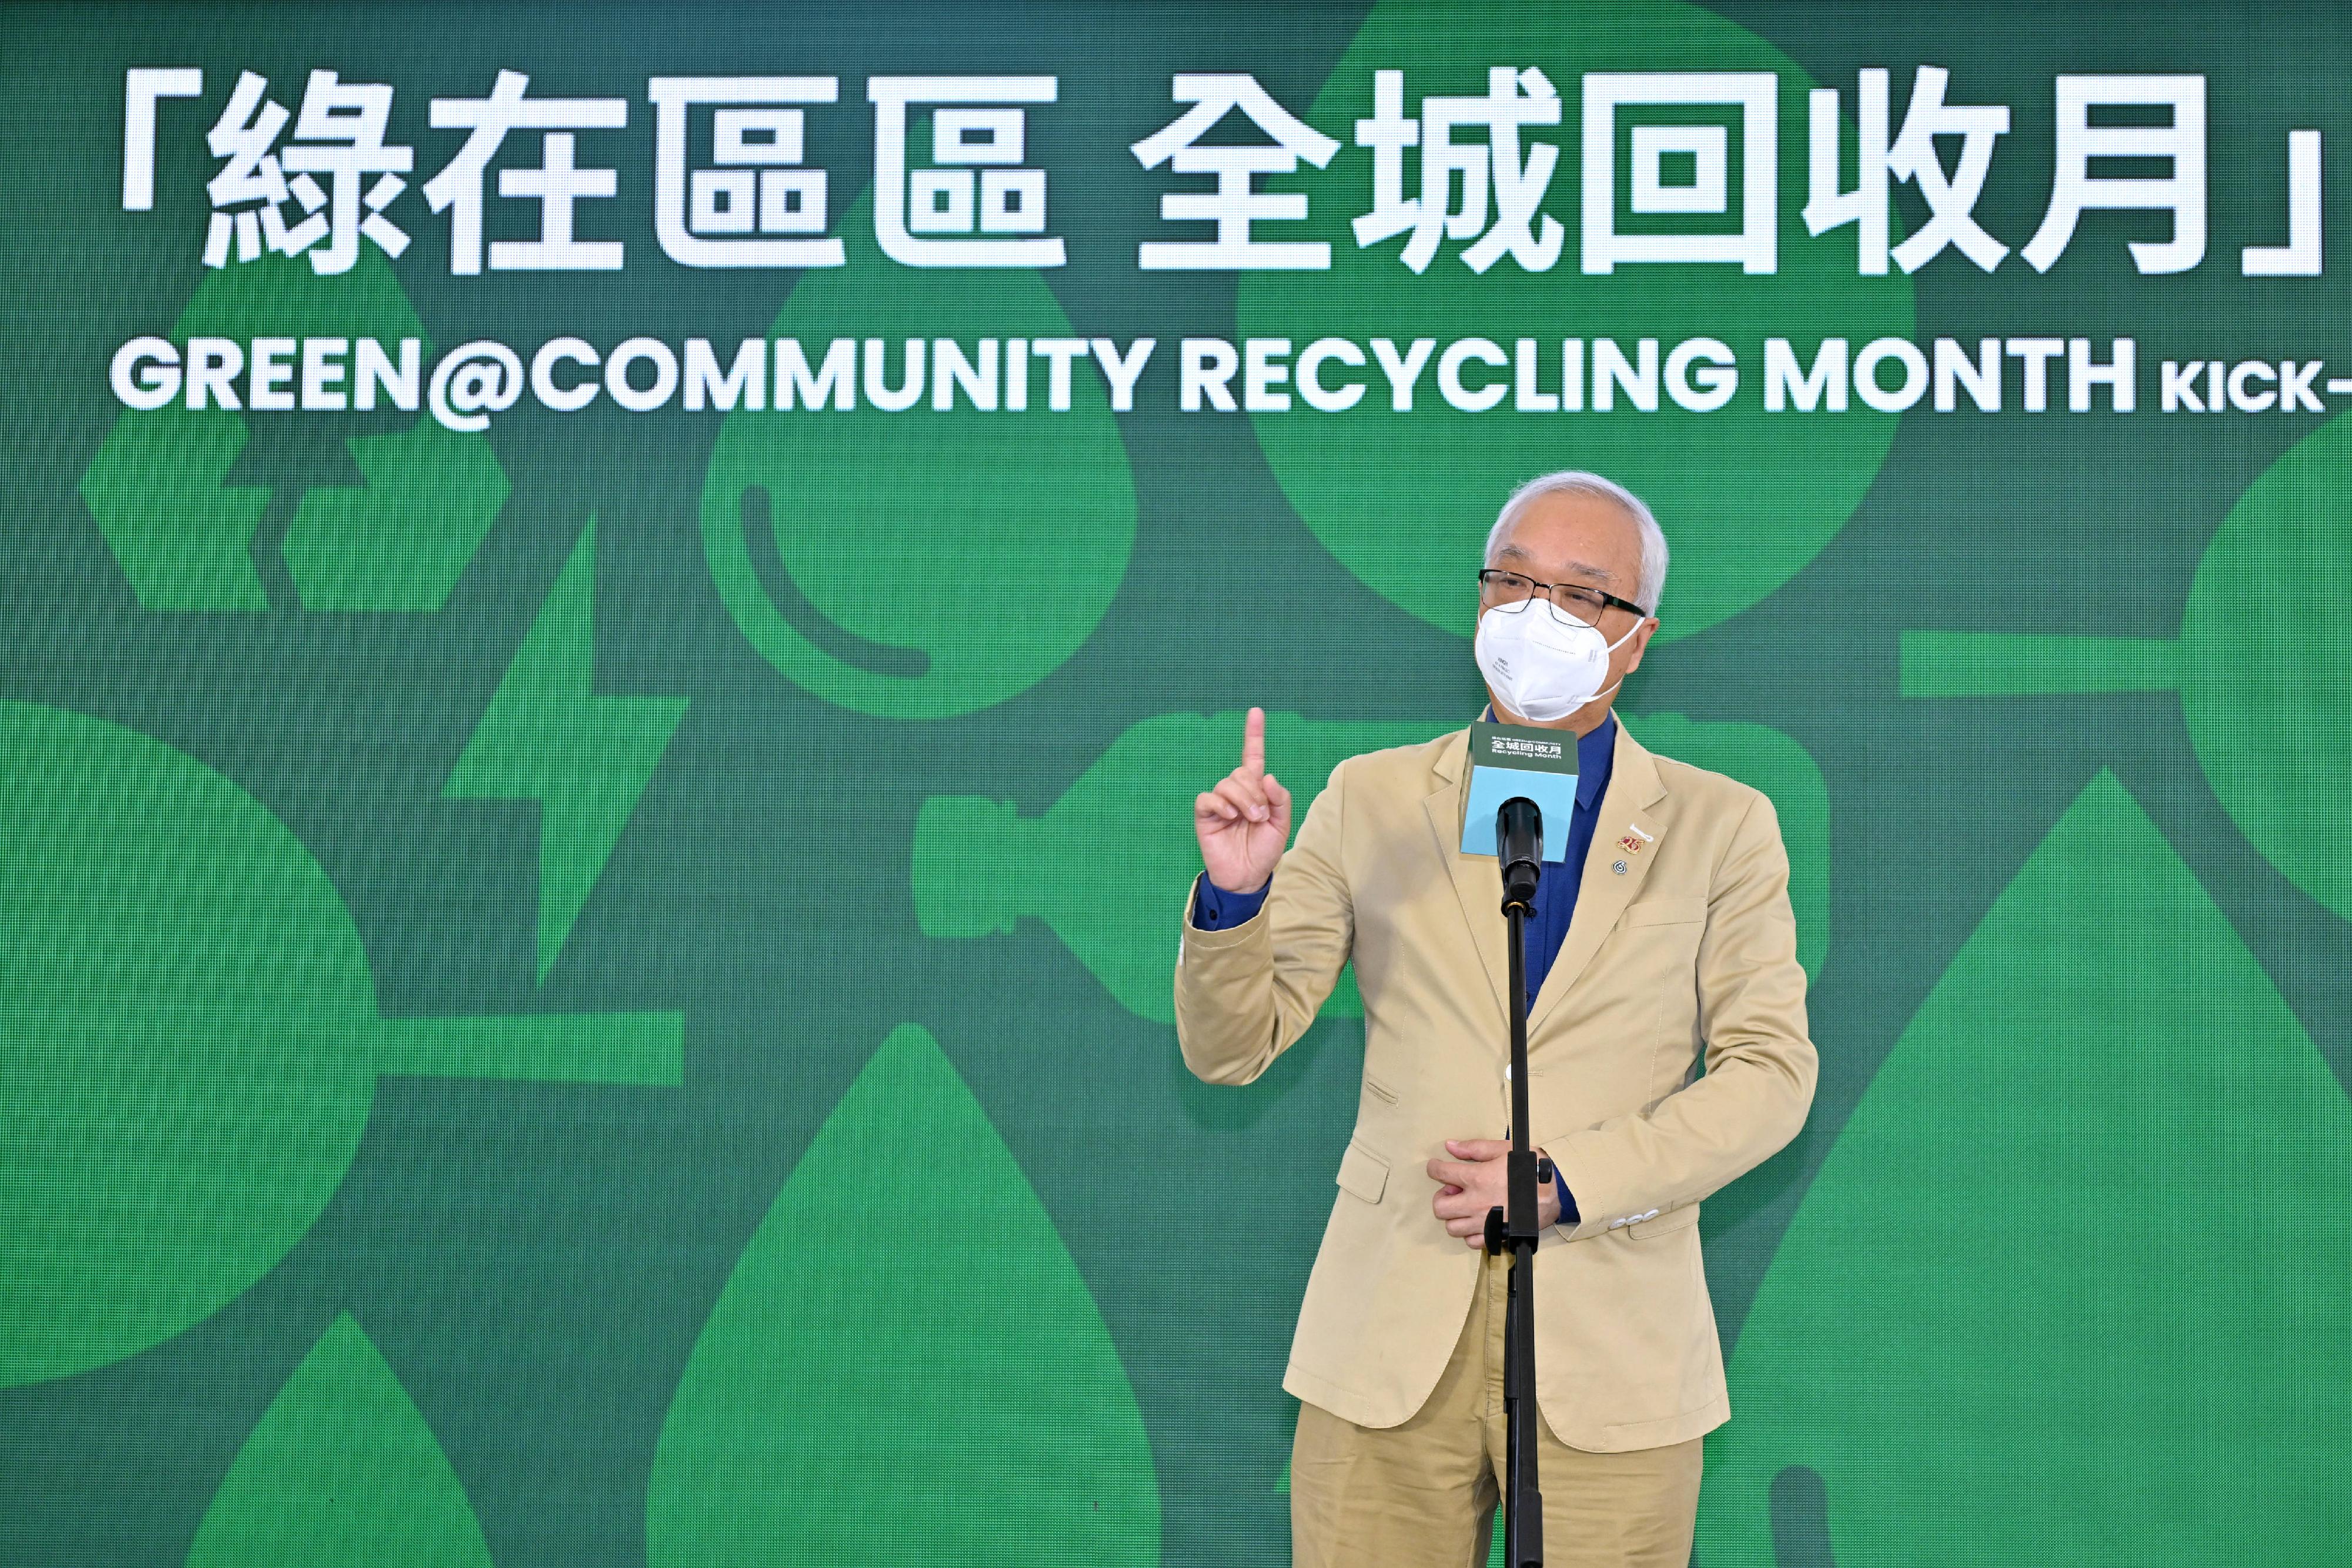 The Kick-off Ceremony of GREEN@COMMUNITY Recycling Month organised by the Environmental Protection Department was held at the Recycling Station GREEN@KWUN TONG today (November 26). Photo shows the Secretary for Environment and Ecology, Mr Tse Chin-wan, speaking at the ceremony. He encouraged the public to integrate proper source separation of waste and clean recycling into their daily lives.